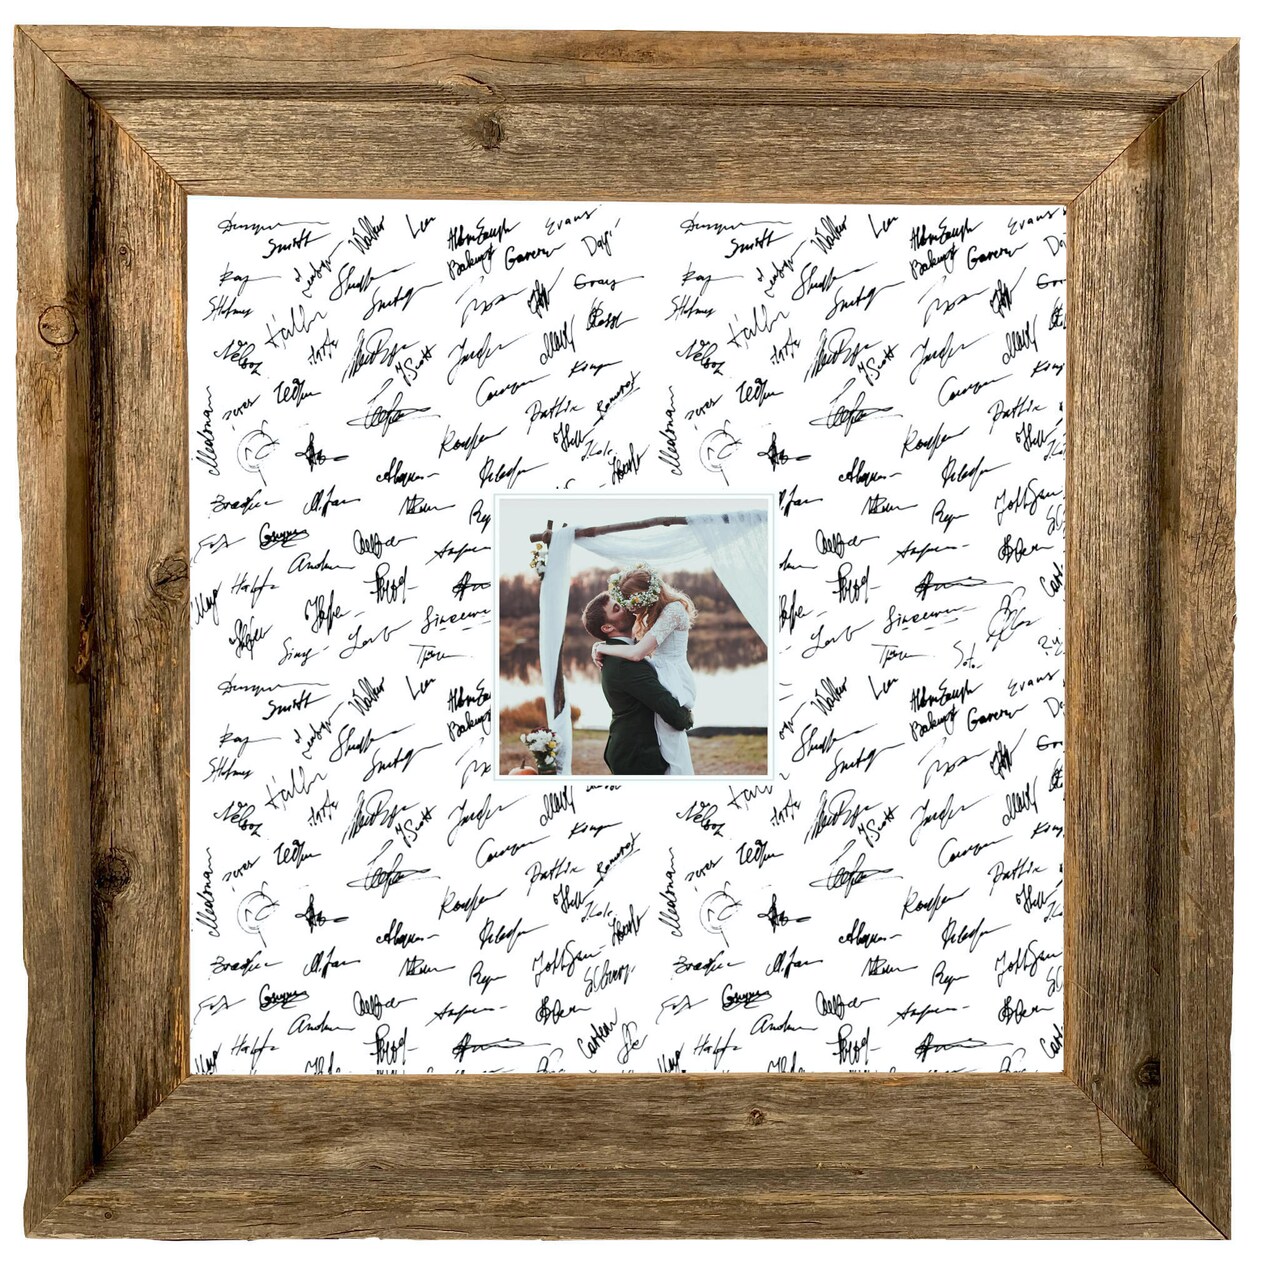 Rustic Farmhouse Wedding Picture Frames with Signature Mat